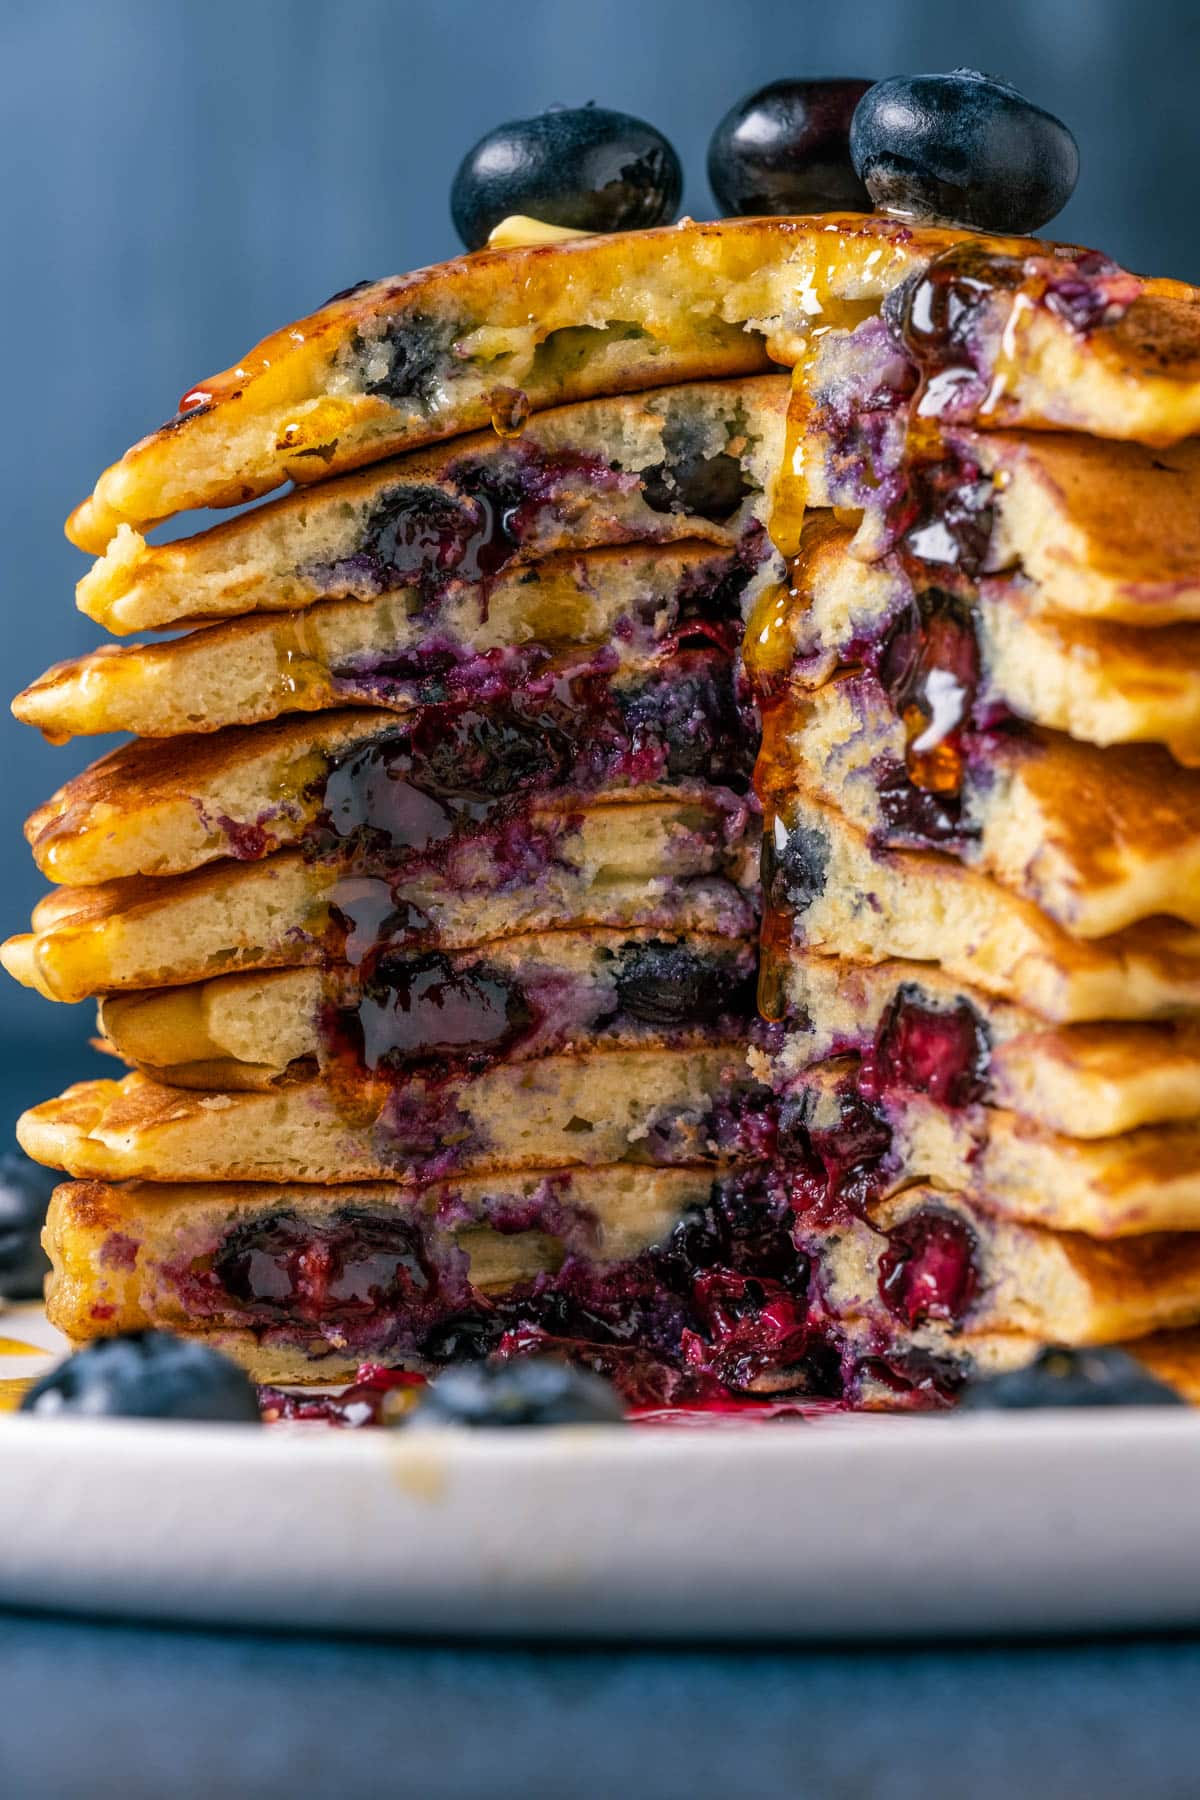 Blueberry pancakes stacked up on a white plate with a portion cut out.